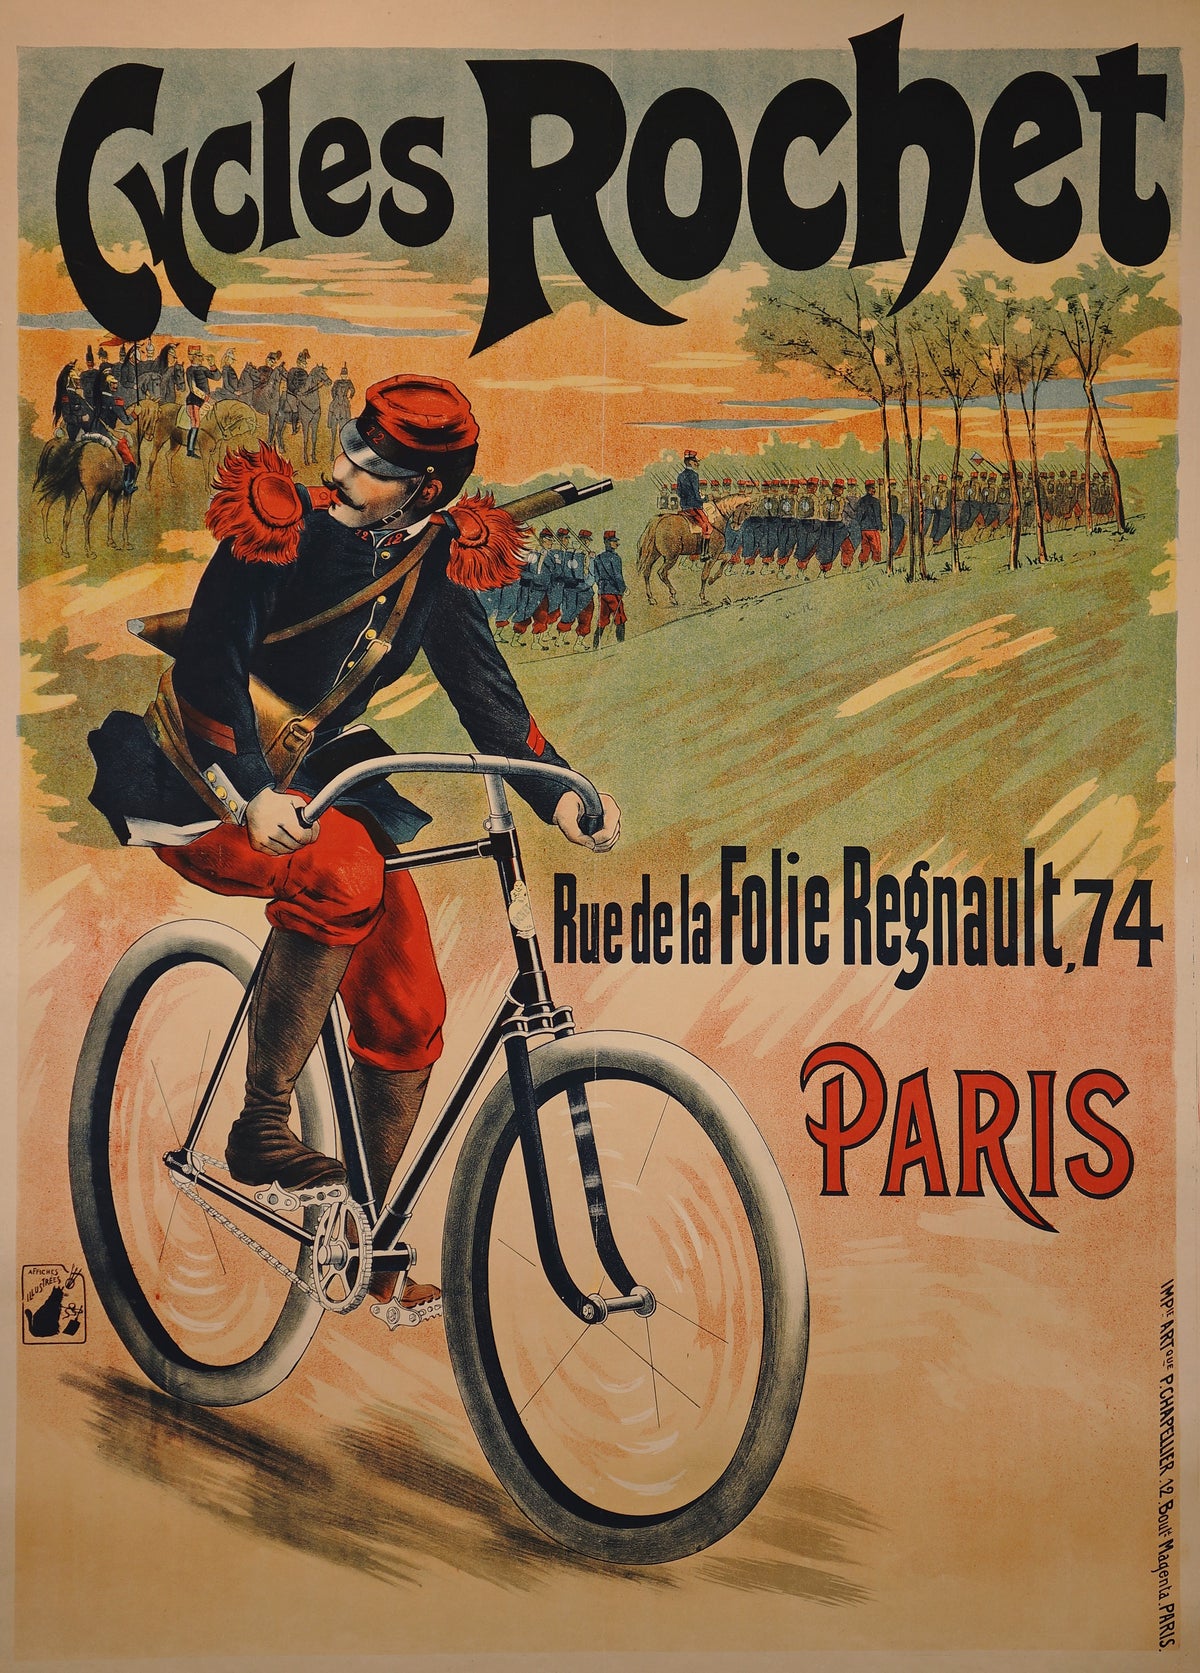 Cycles Rochet - Authentic Vintage Poster